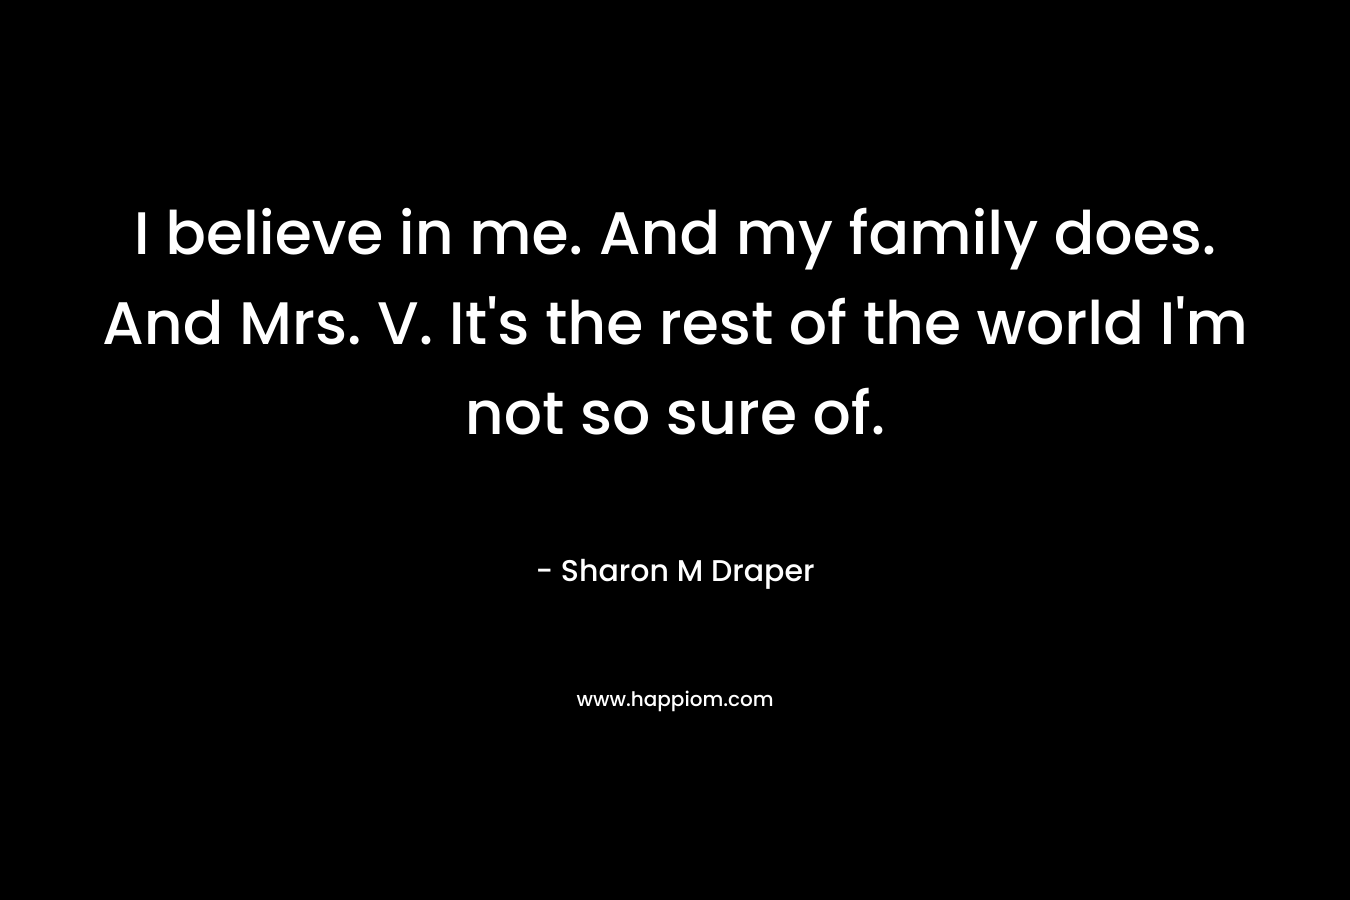 I believe in me. And my family does. And Mrs. V. It's the rest of the world I'm not so sure of.